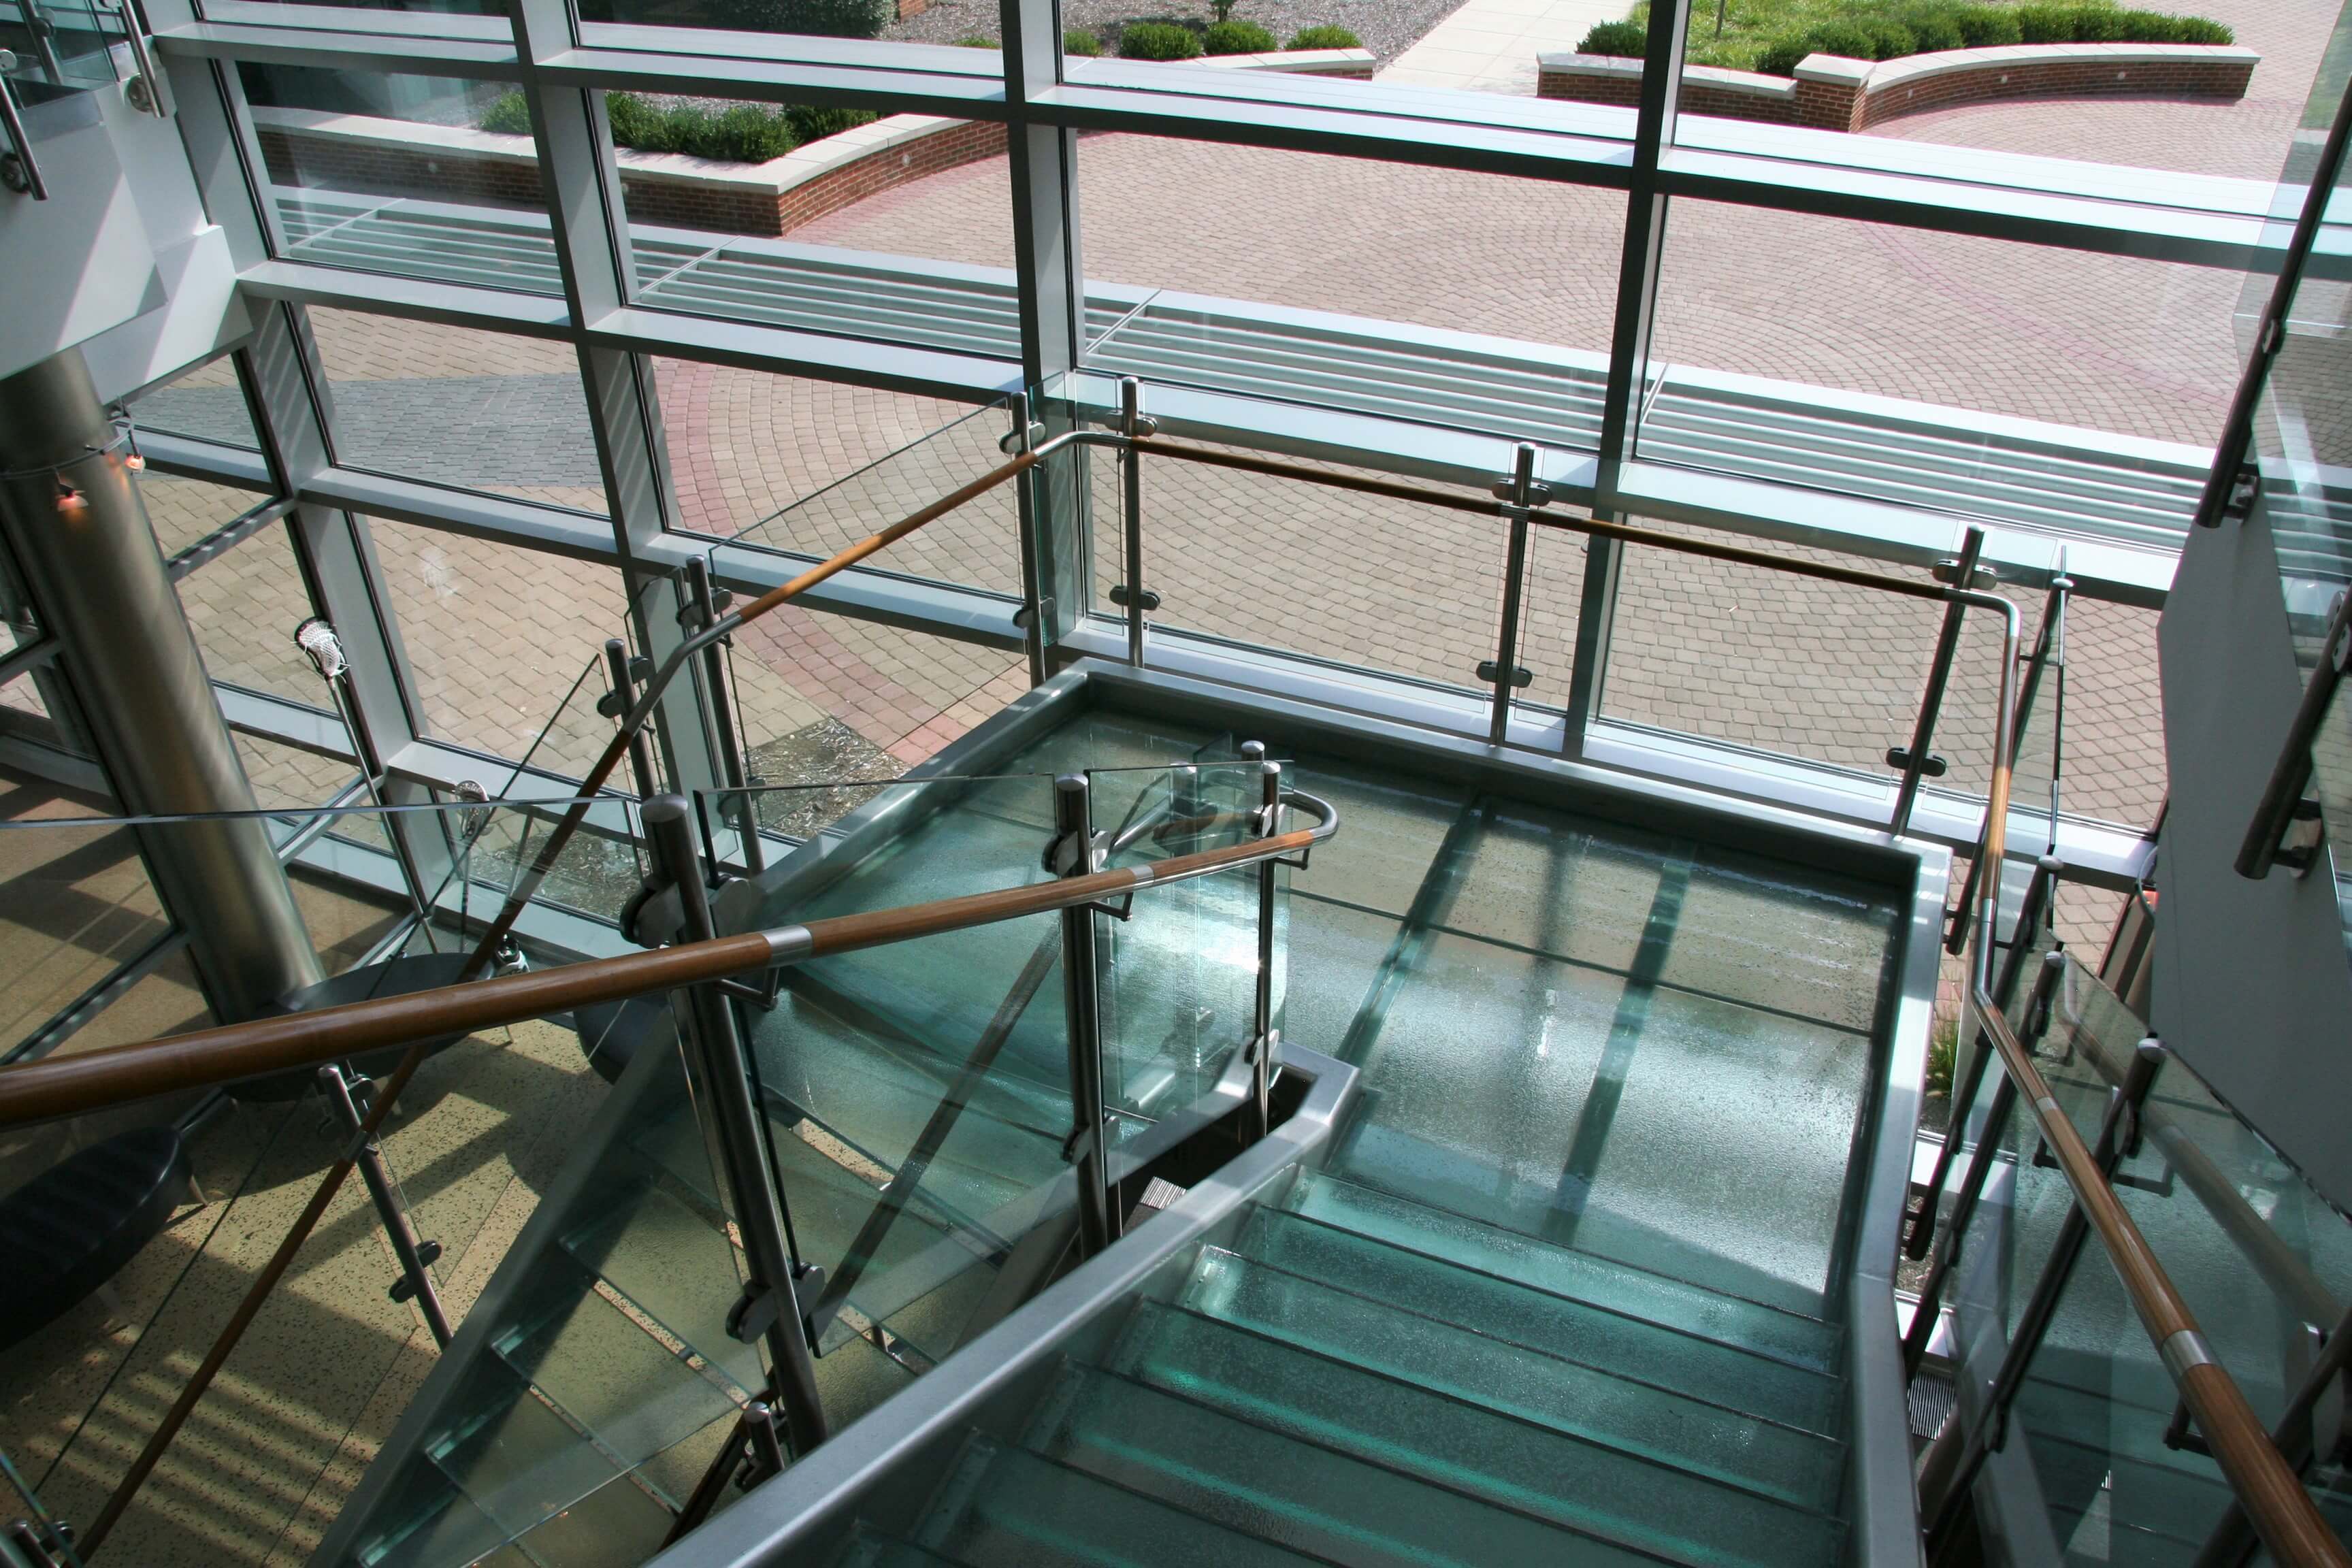 Sunlit view of Circum guardrail installation with glass infill at Blackhawk College, MD.